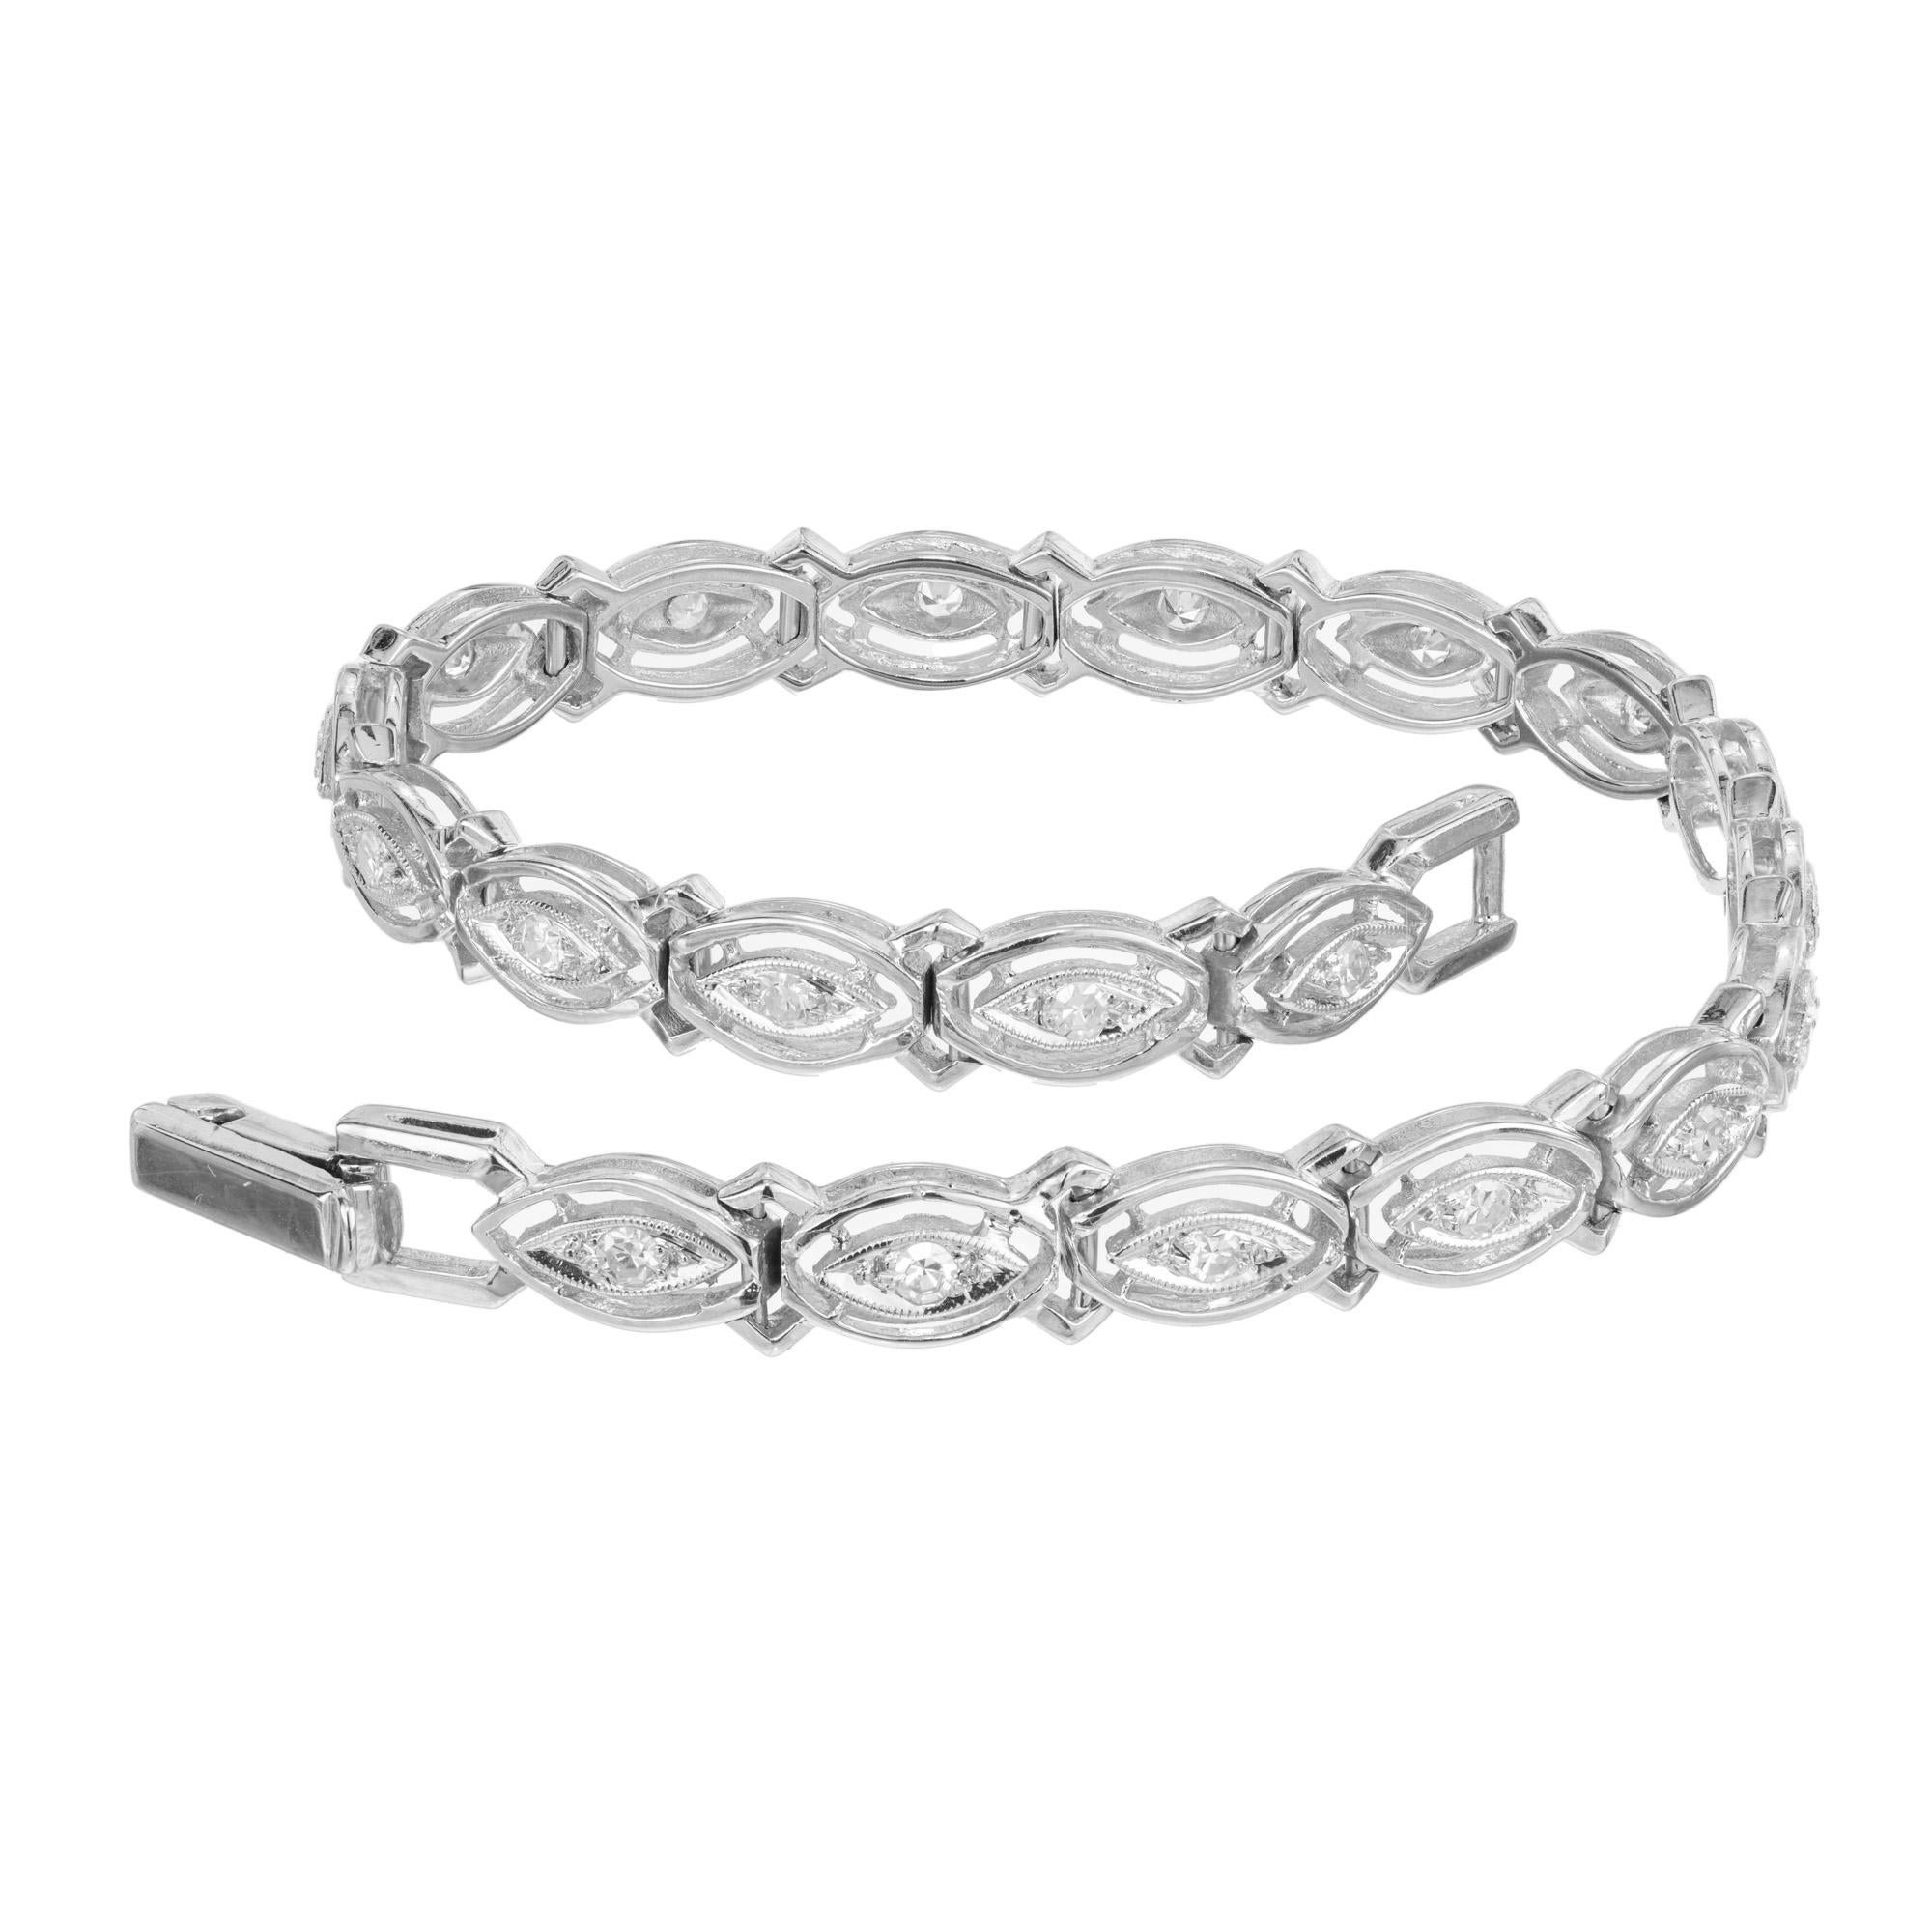 Late Art Deco, 1940's diamond and white gold bracelet. This unique bracelet is adorned with 20 single cut diamonds that are mounted in a marquise shape setting with a second marquise shape halo. Constructed in 14k white gold this link bracelet